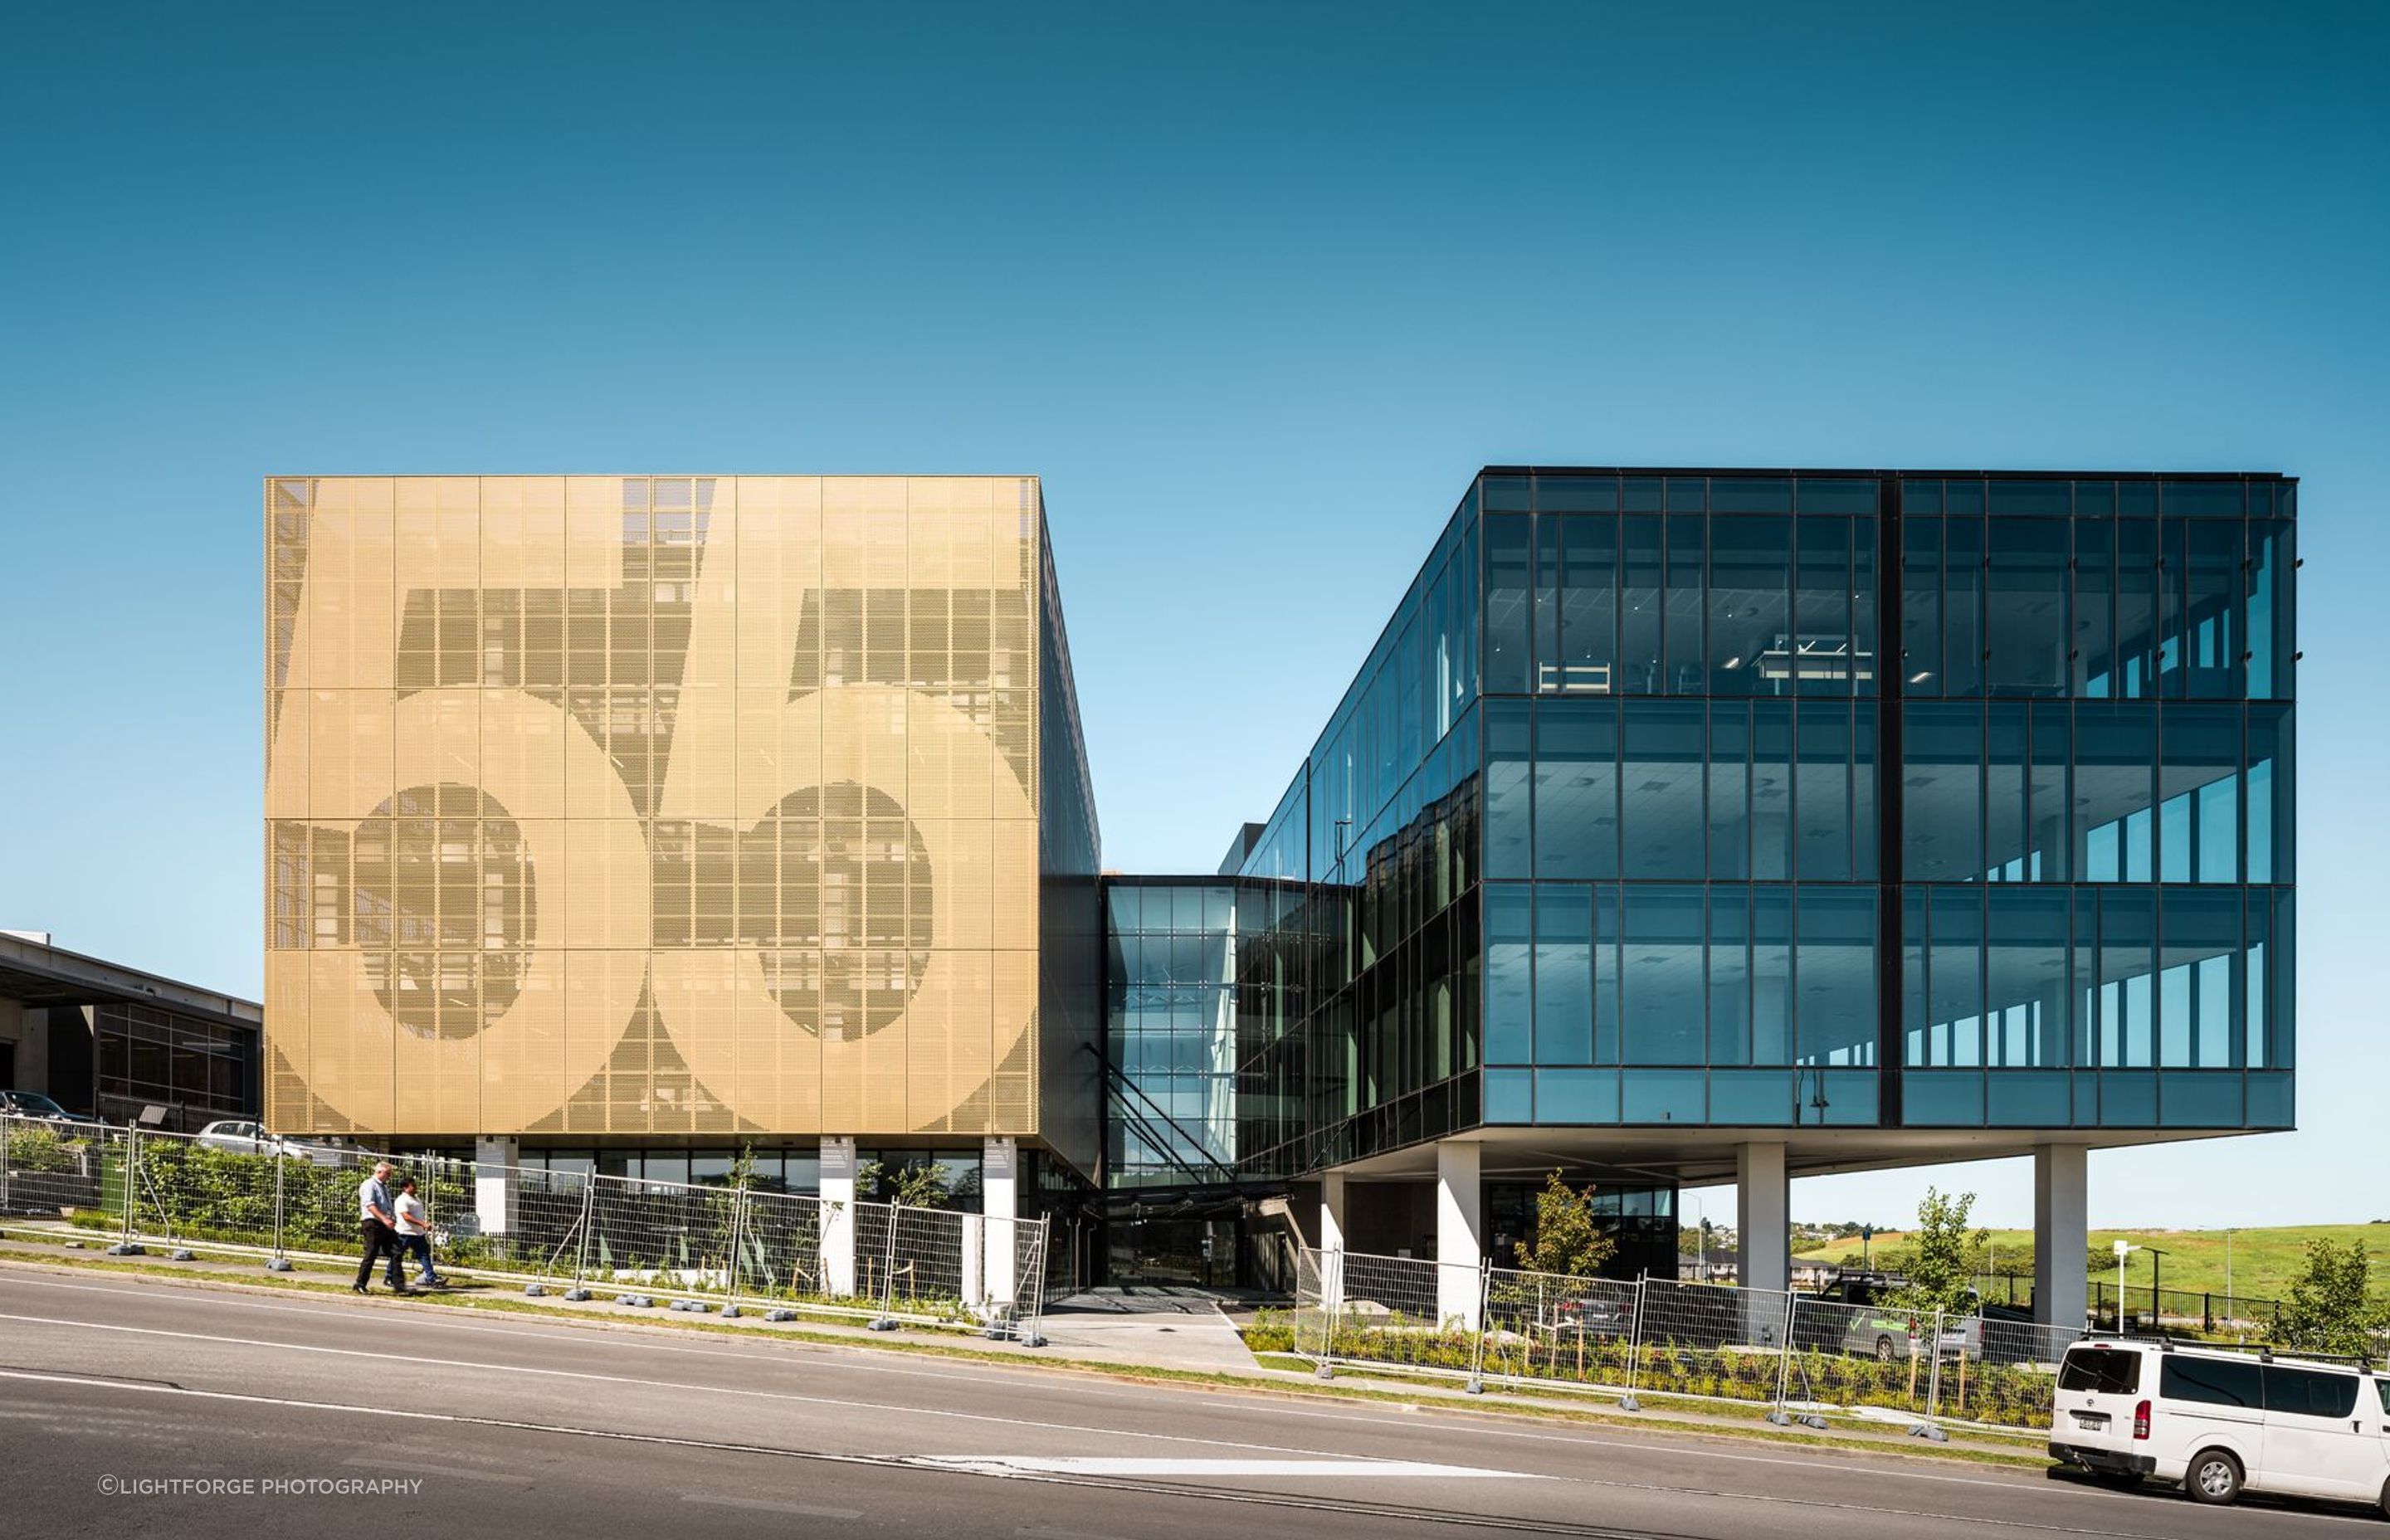 The view from Corinthian Drive showcases the number '55' on the perforated metal screens of the car parking building.